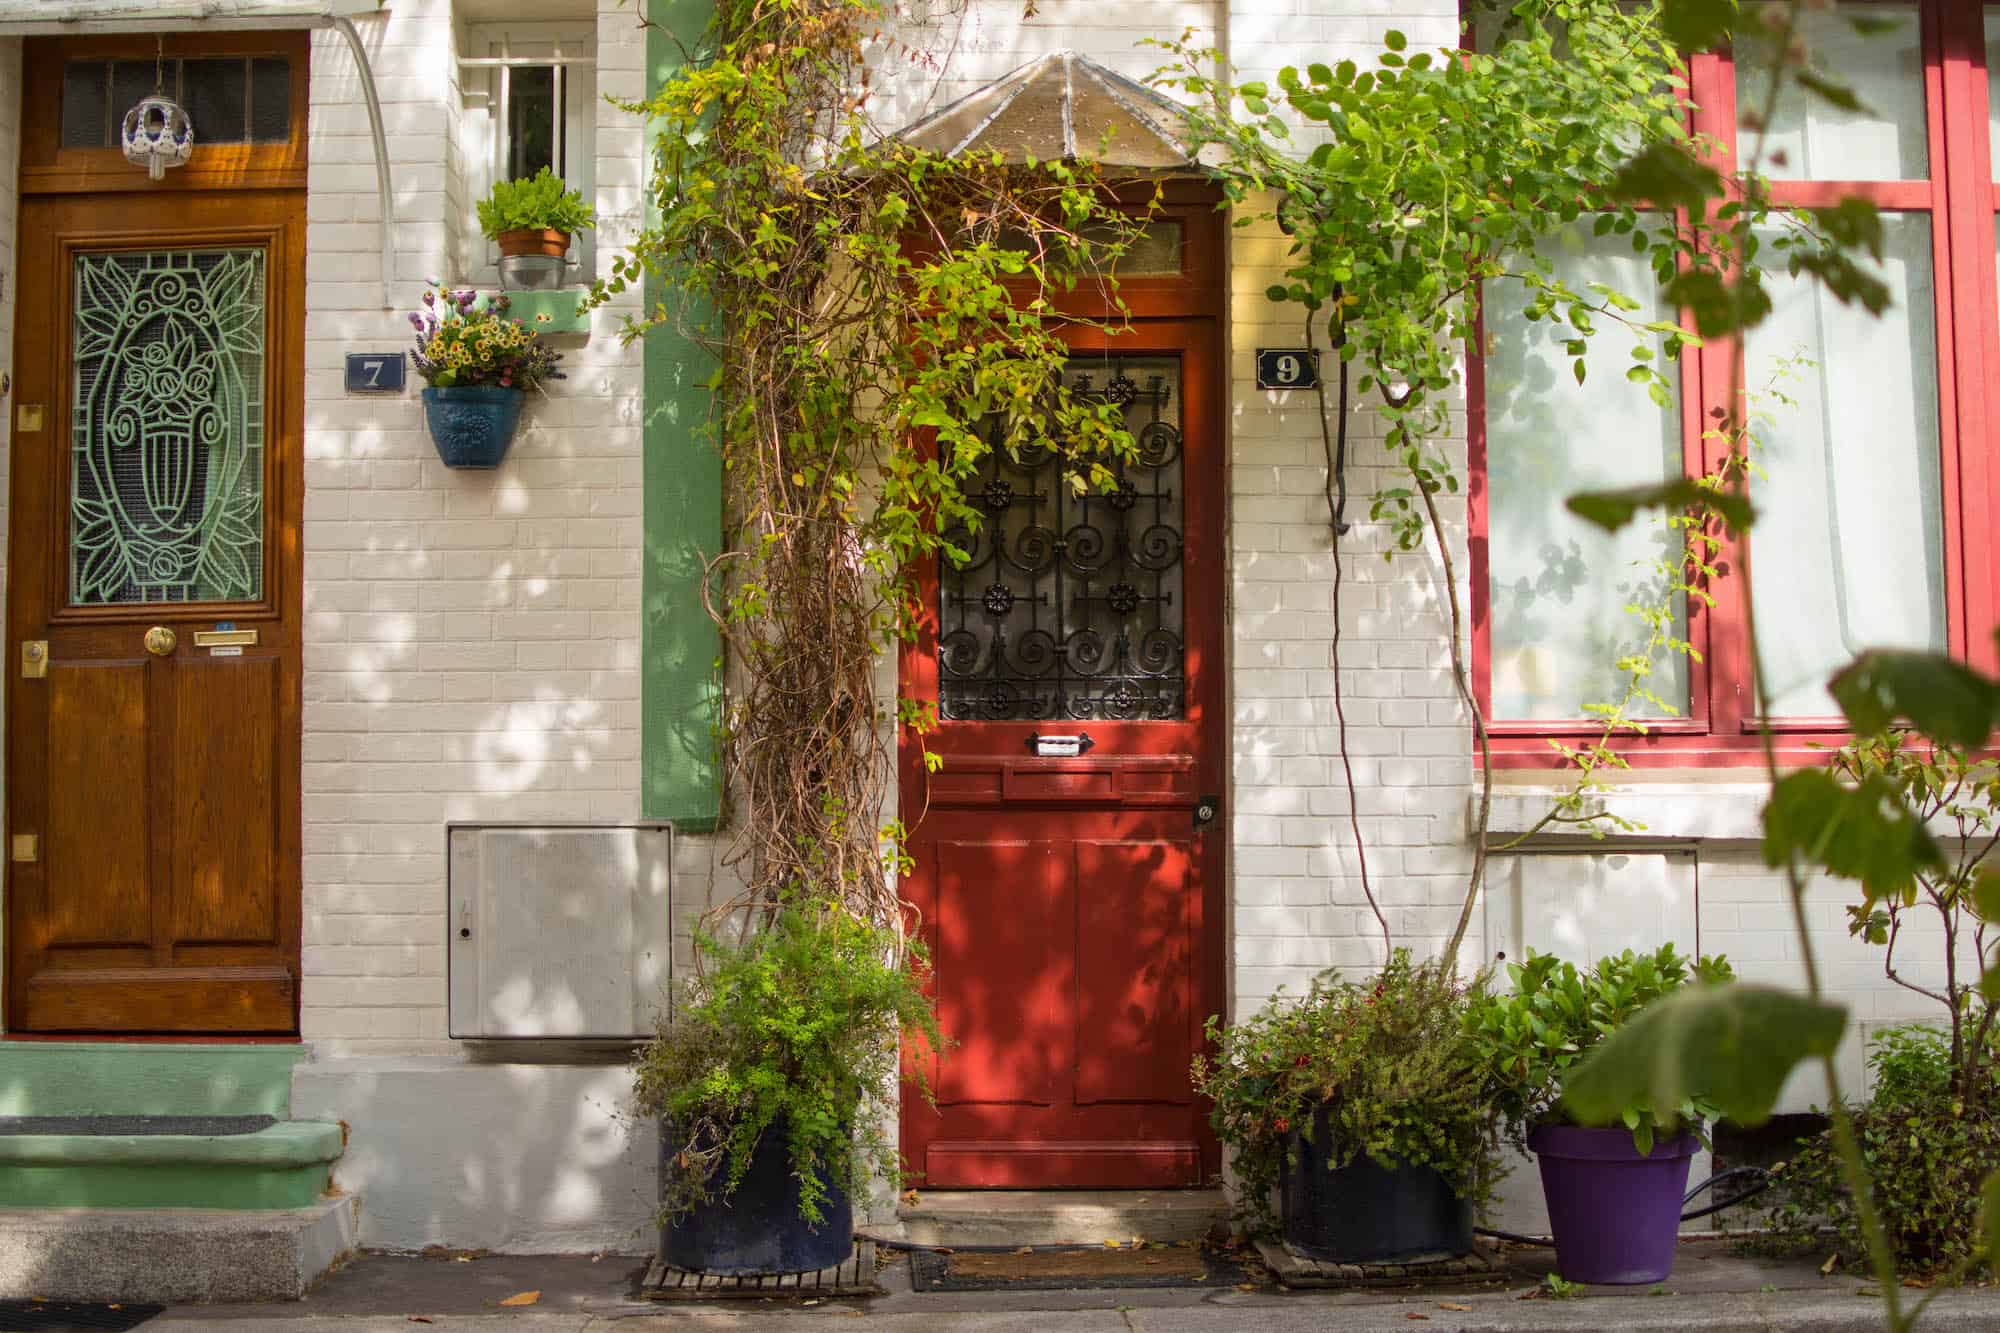 The Cité Florale, in the Butte-aux-Cailles neighborhood of Paris' 13th arrondissement, is filled with homes and potted plants spilling onto the tiny streets. 